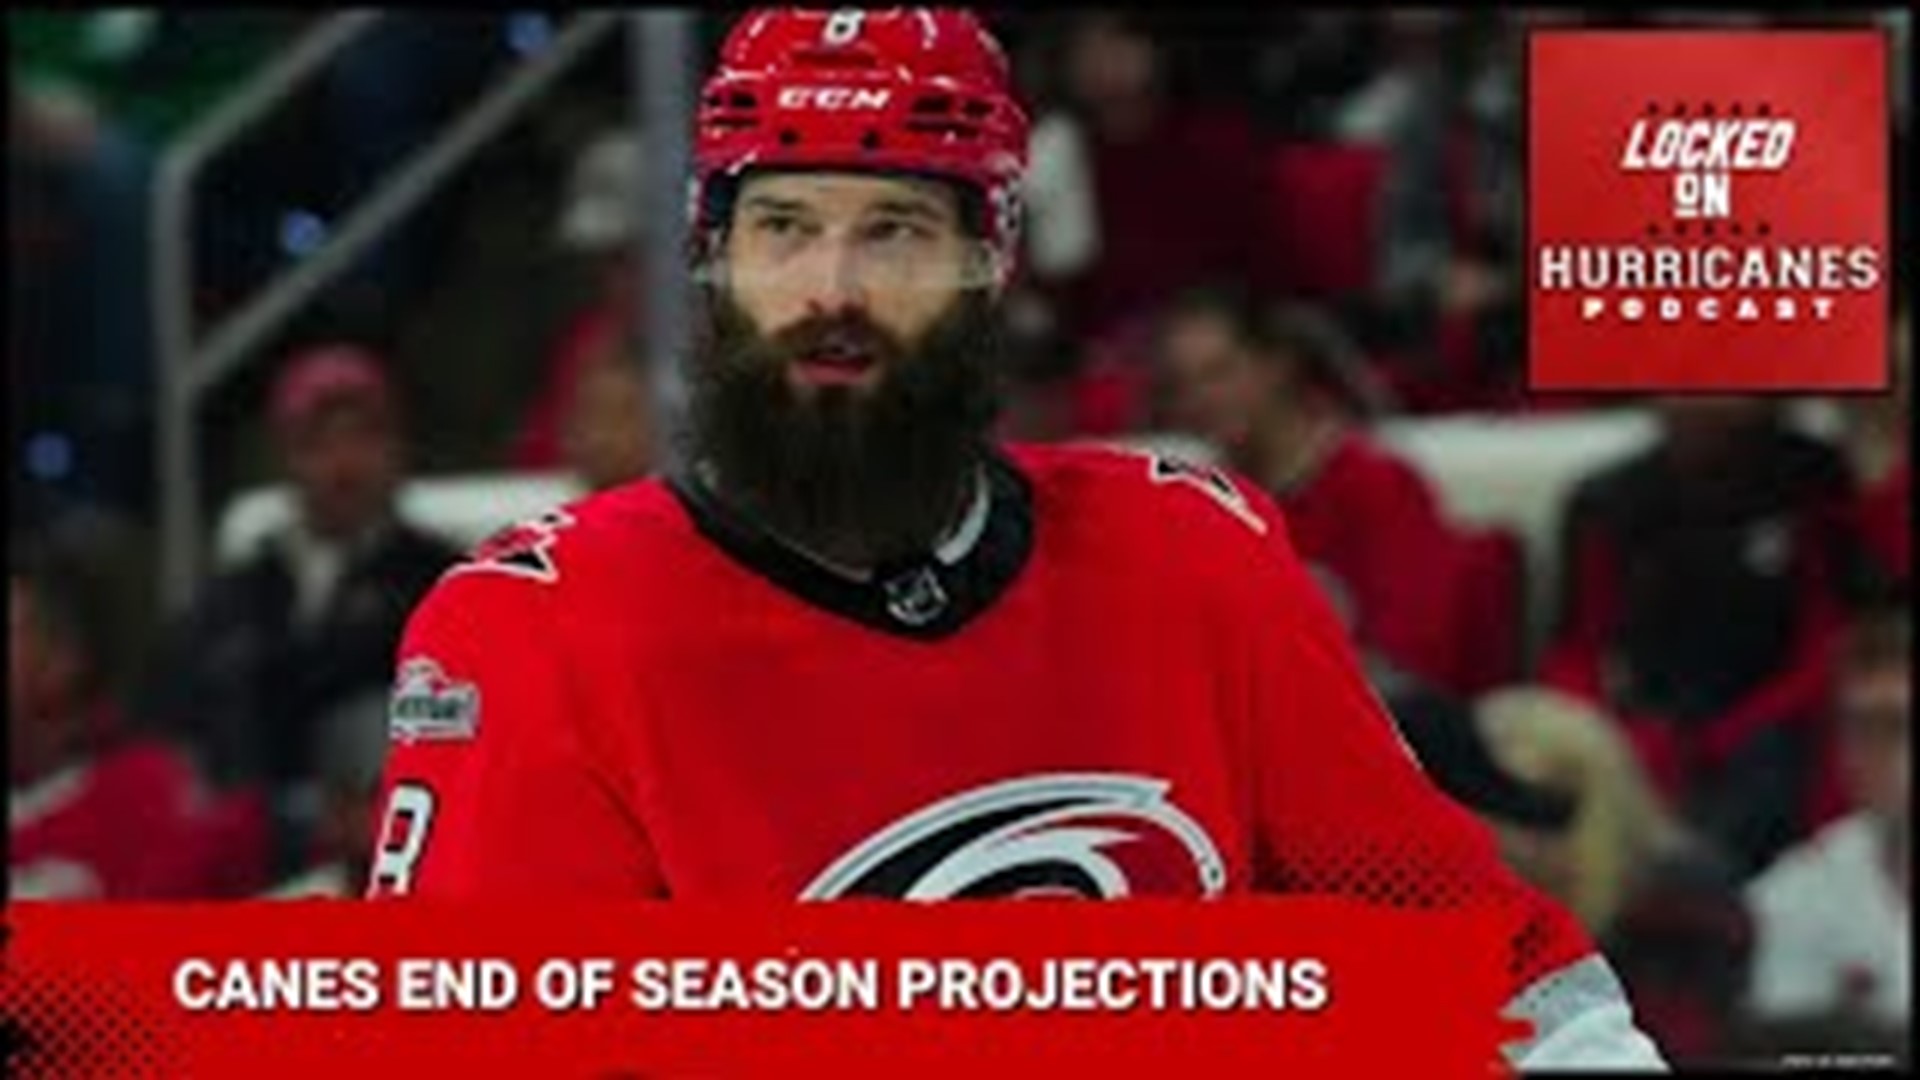 The end of the NHL season will be here before we know it. And several members of the Carolina Hurricanes roster are poised to exceed their projected totals.